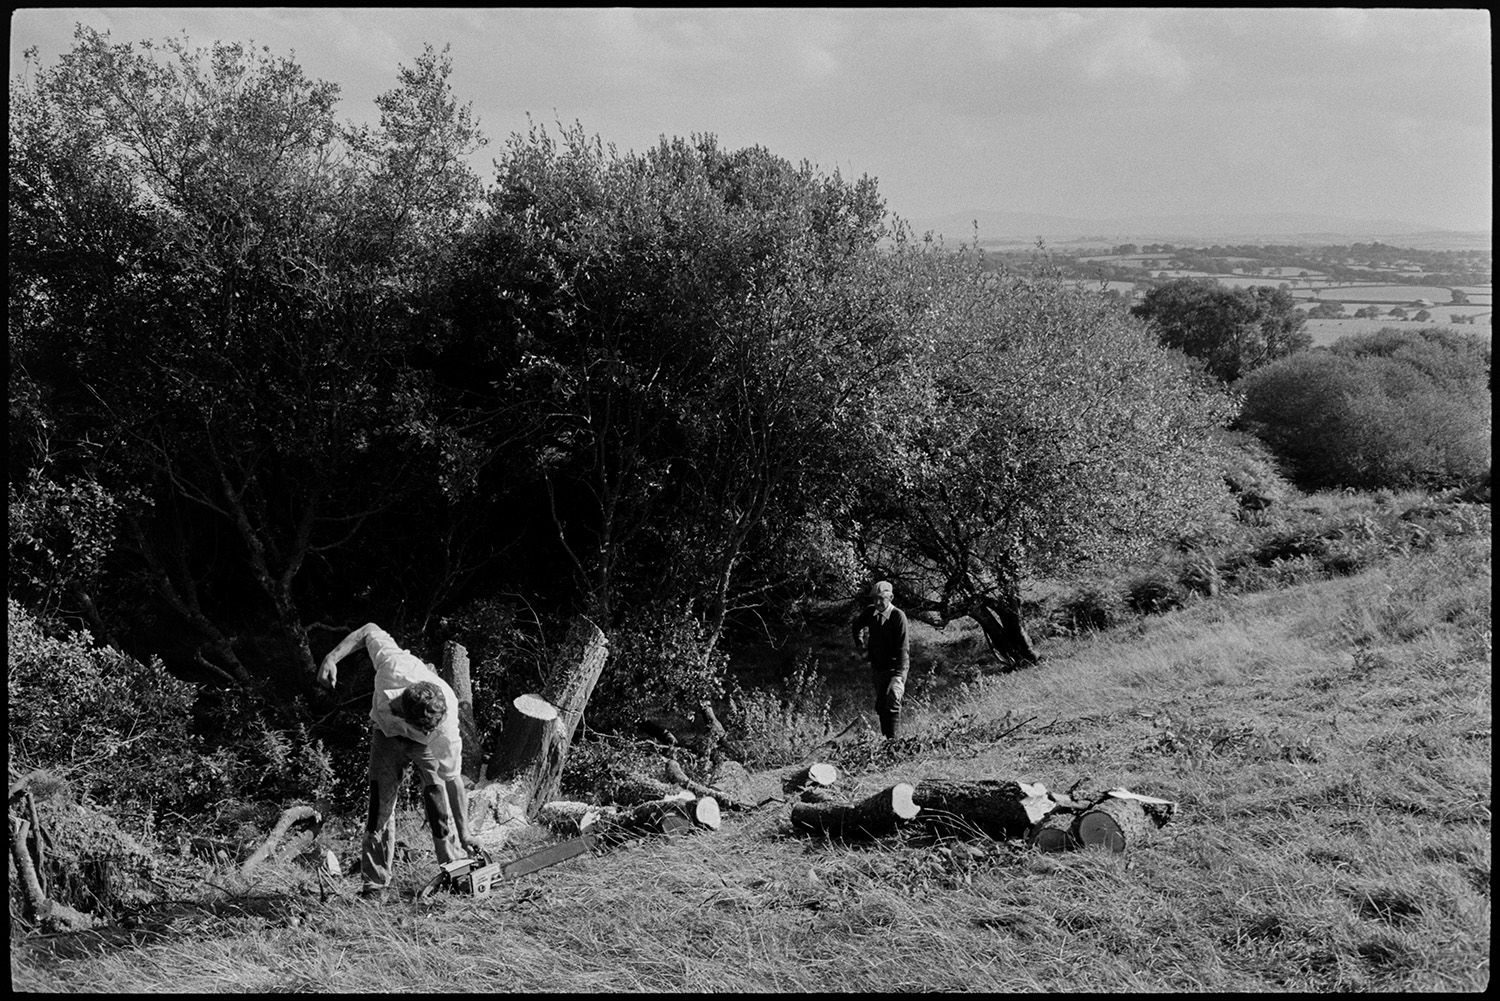 Men cutting trees on moor and loading logs onto trailer. View to Dartmoor.
[Two men cutting trees, using a chainsaw, on Hatherleigh Moor, with Dartmoor hills in the background.]